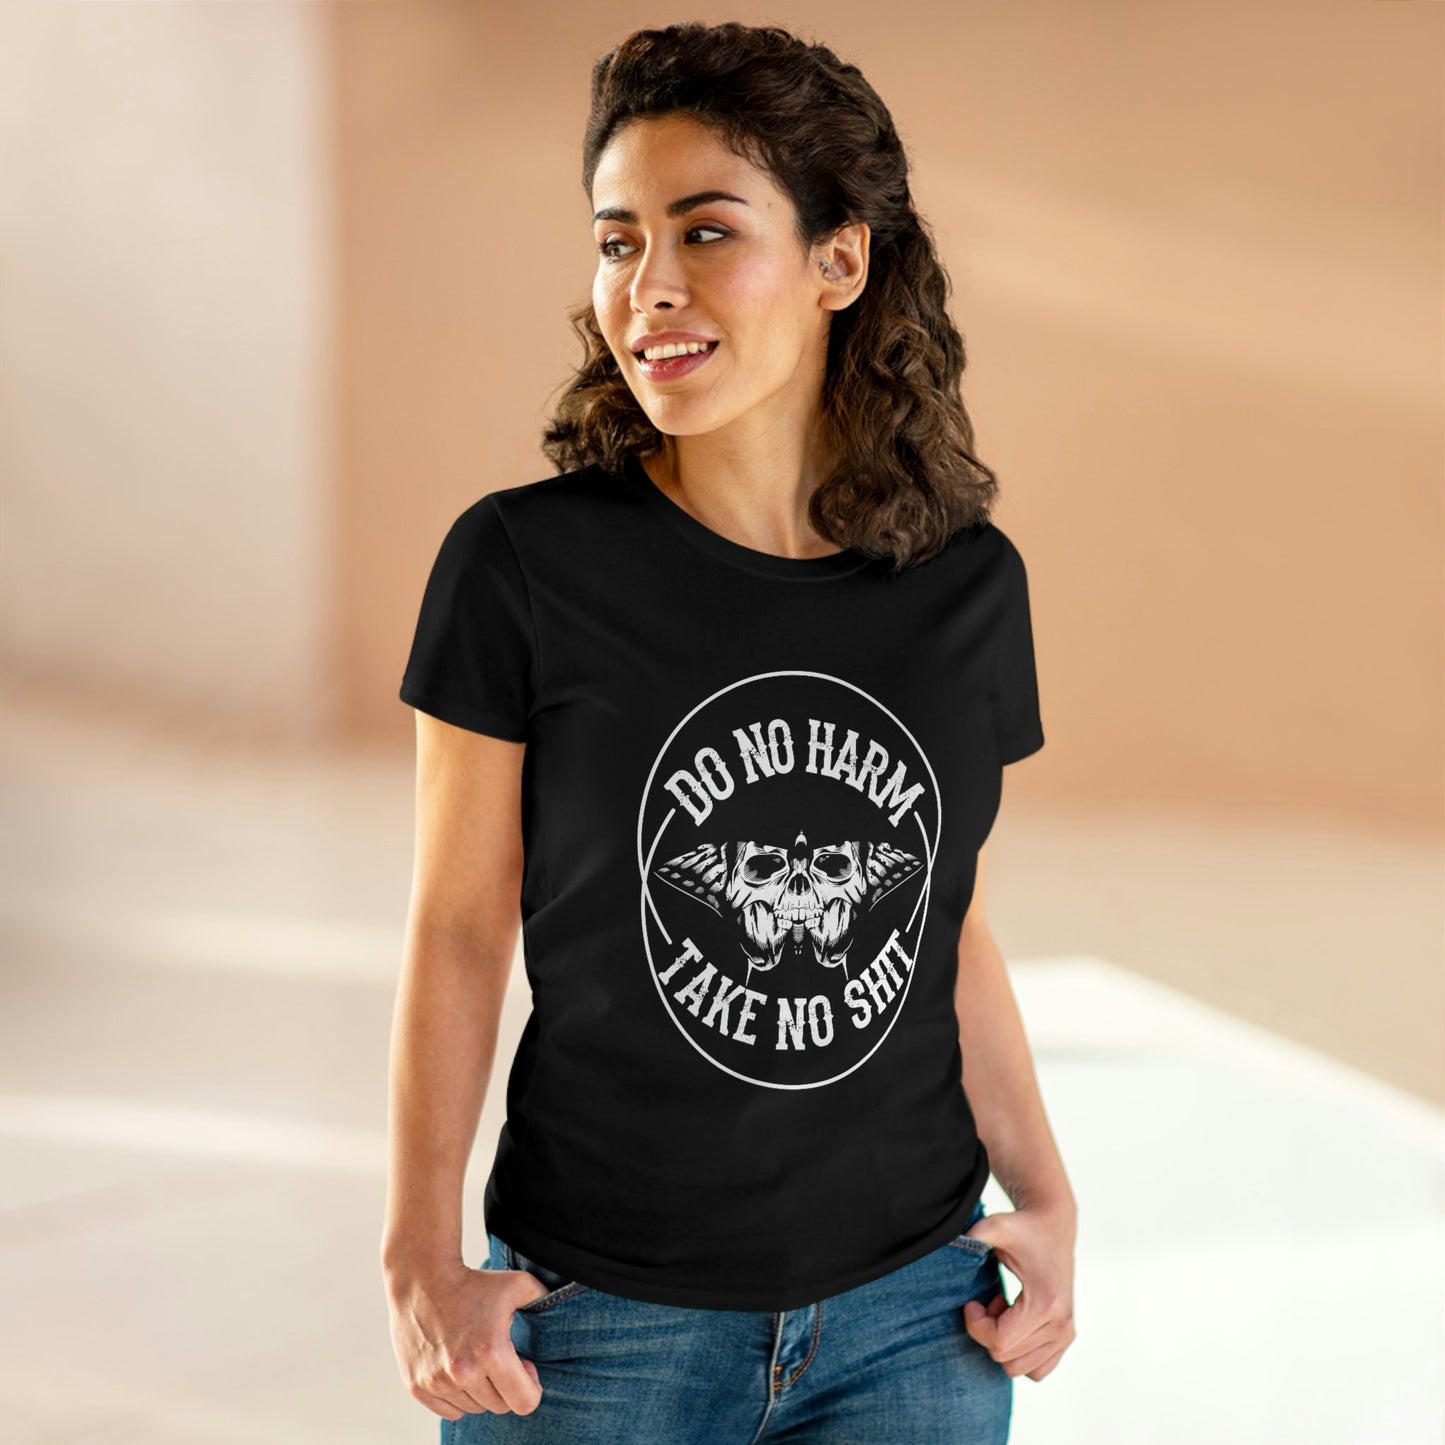 Witch T shirt, Women's Midweight Cotton Tee